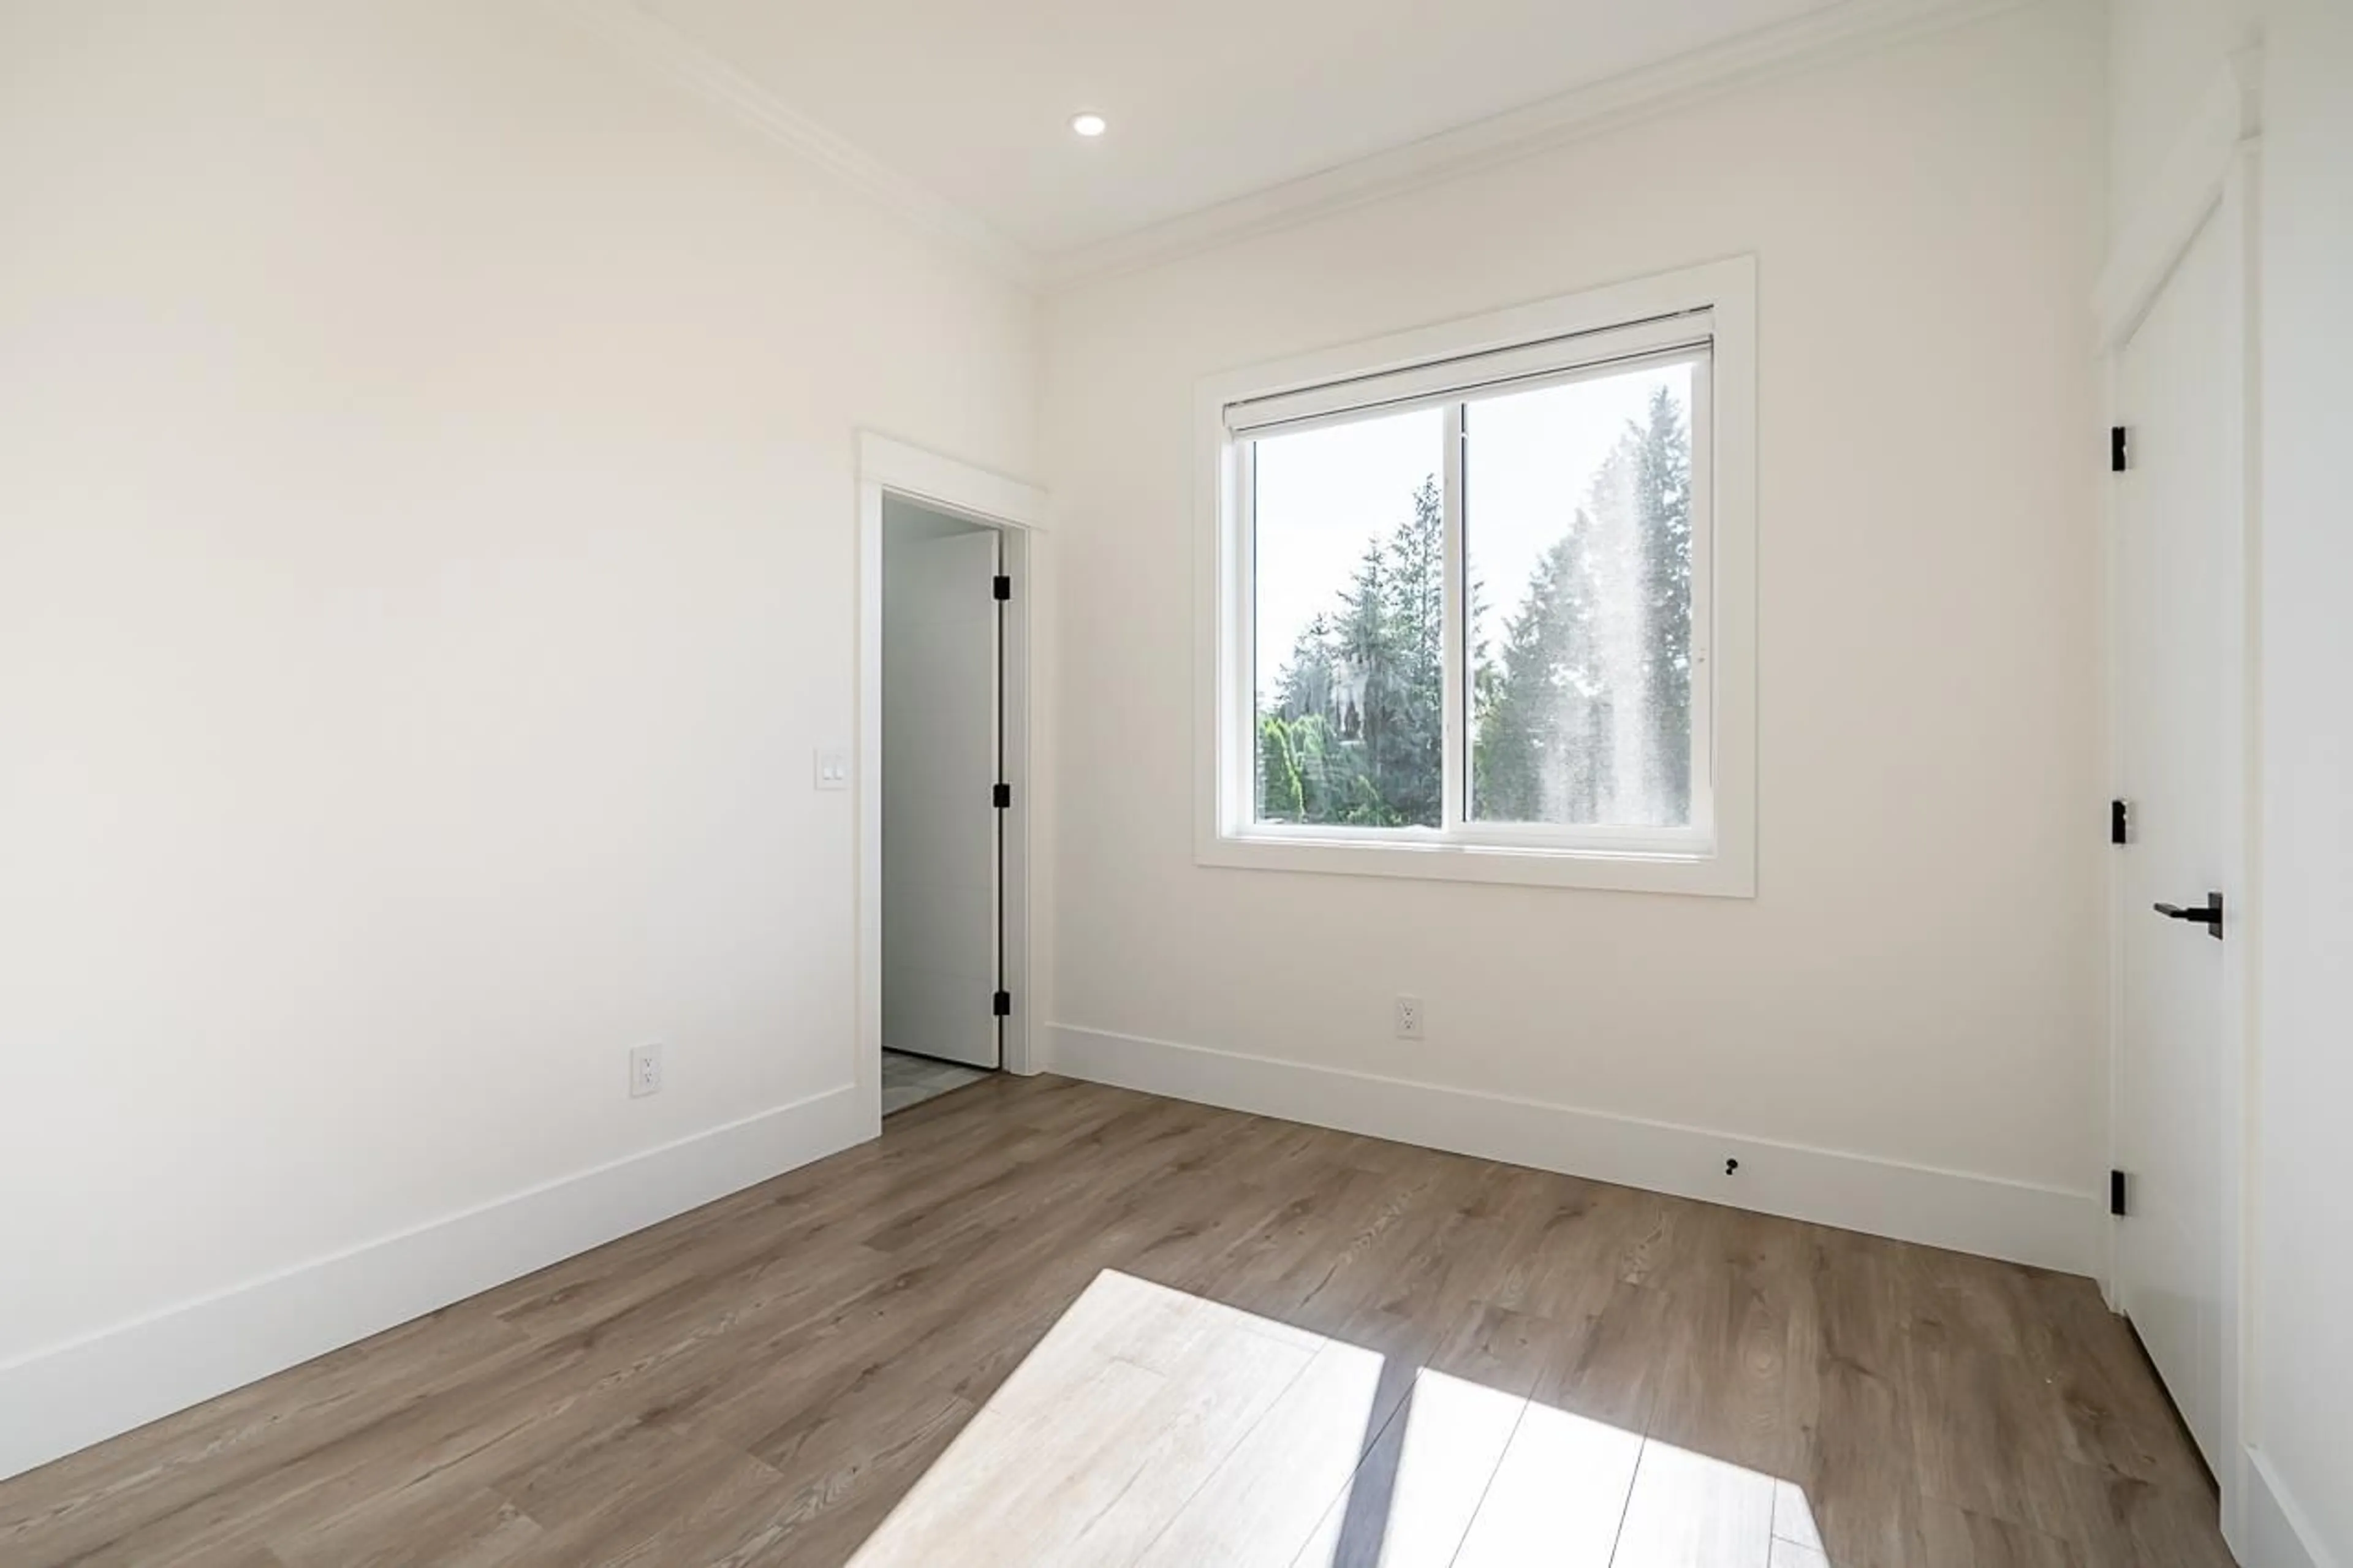 A pic of a room for 18054 63B AVENUE, Surrey British Columbia V3S4G1